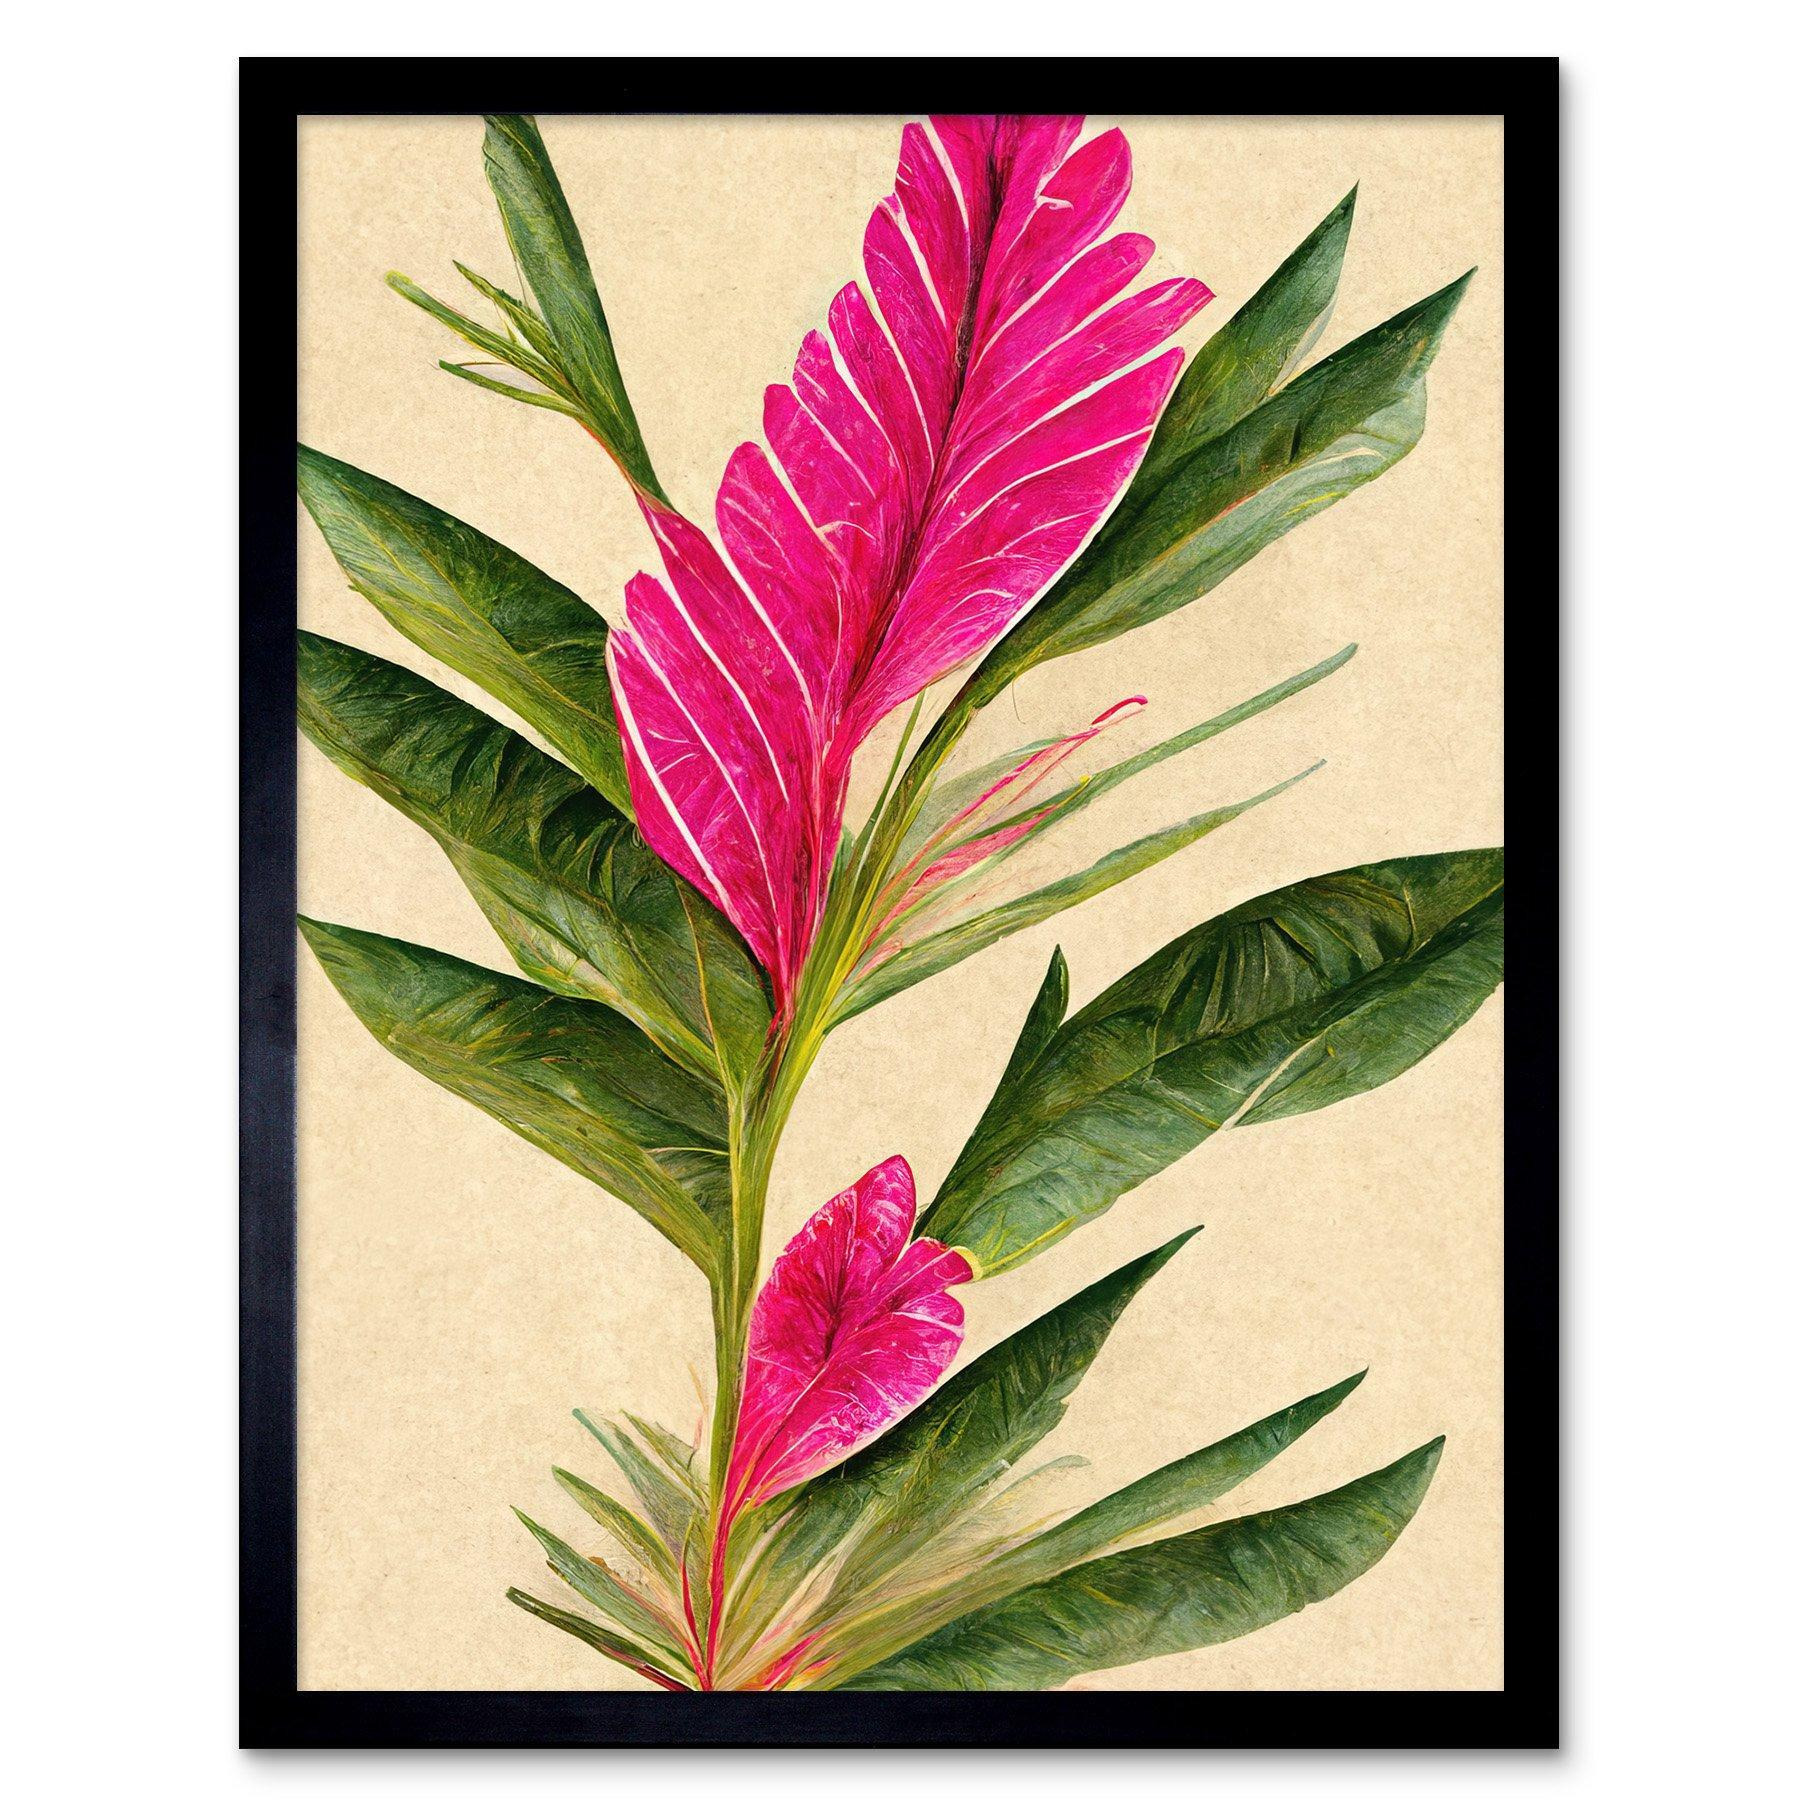 Hawaiian Flower Leaves Illustration In Fuchsia And Green Art Print Framed Poster Wall Decor 12x16 inch - image 1